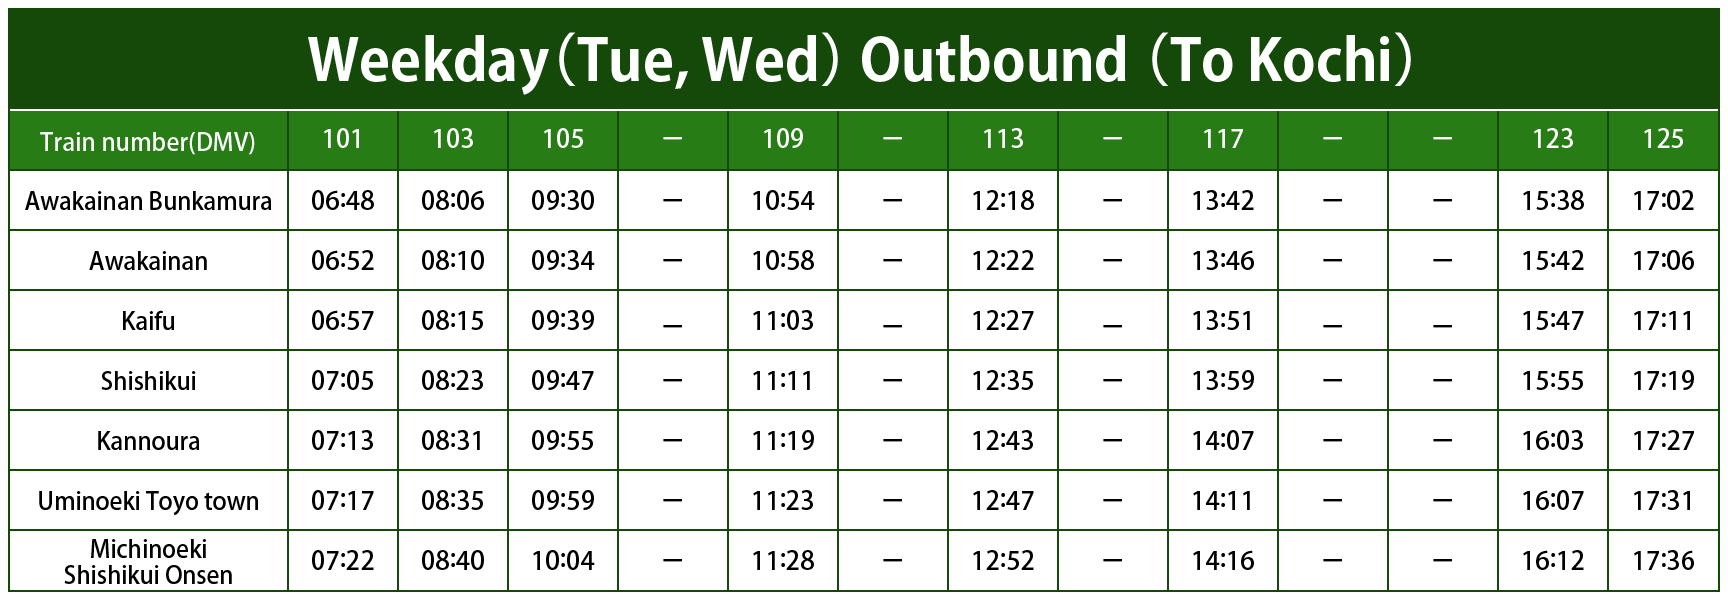 Timetable Weekday (Tue, Wed) Outbound (To Kochi)